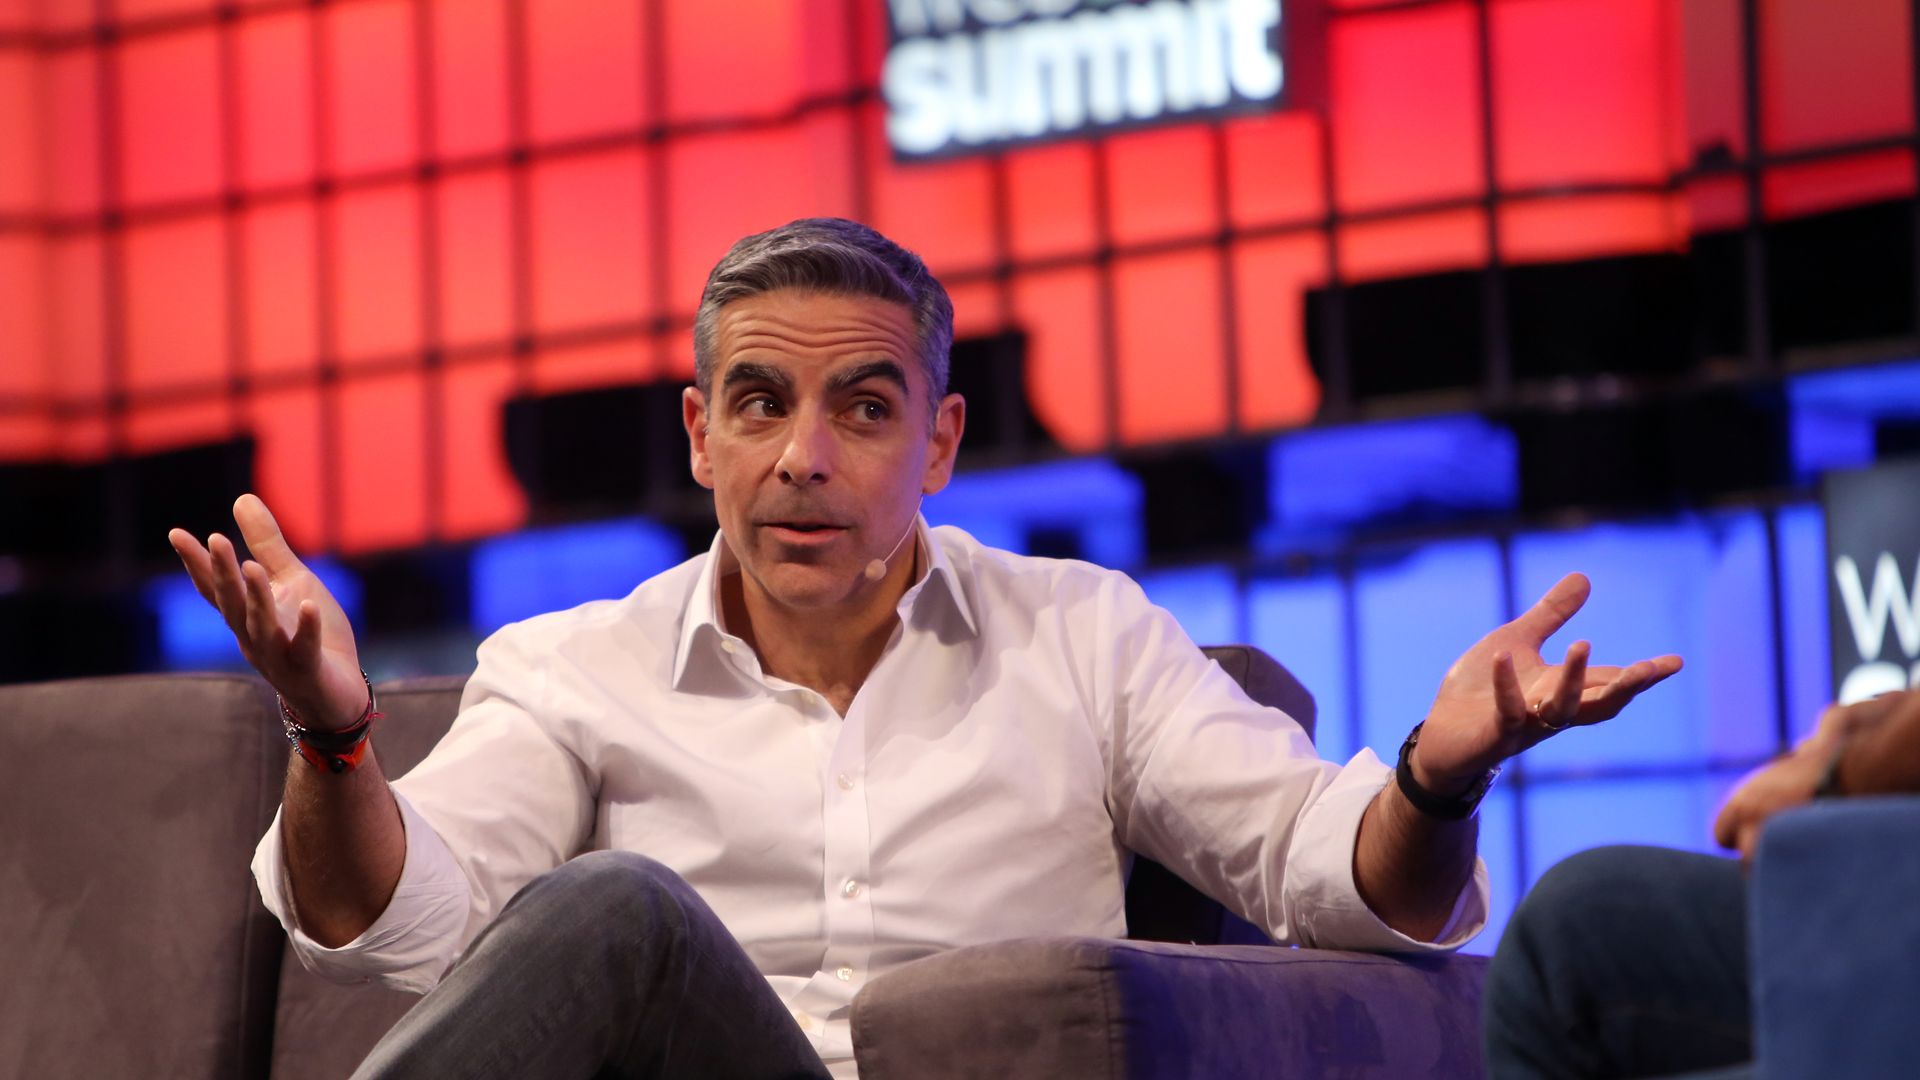 Facebook executive David Marcus speaks at a conference.